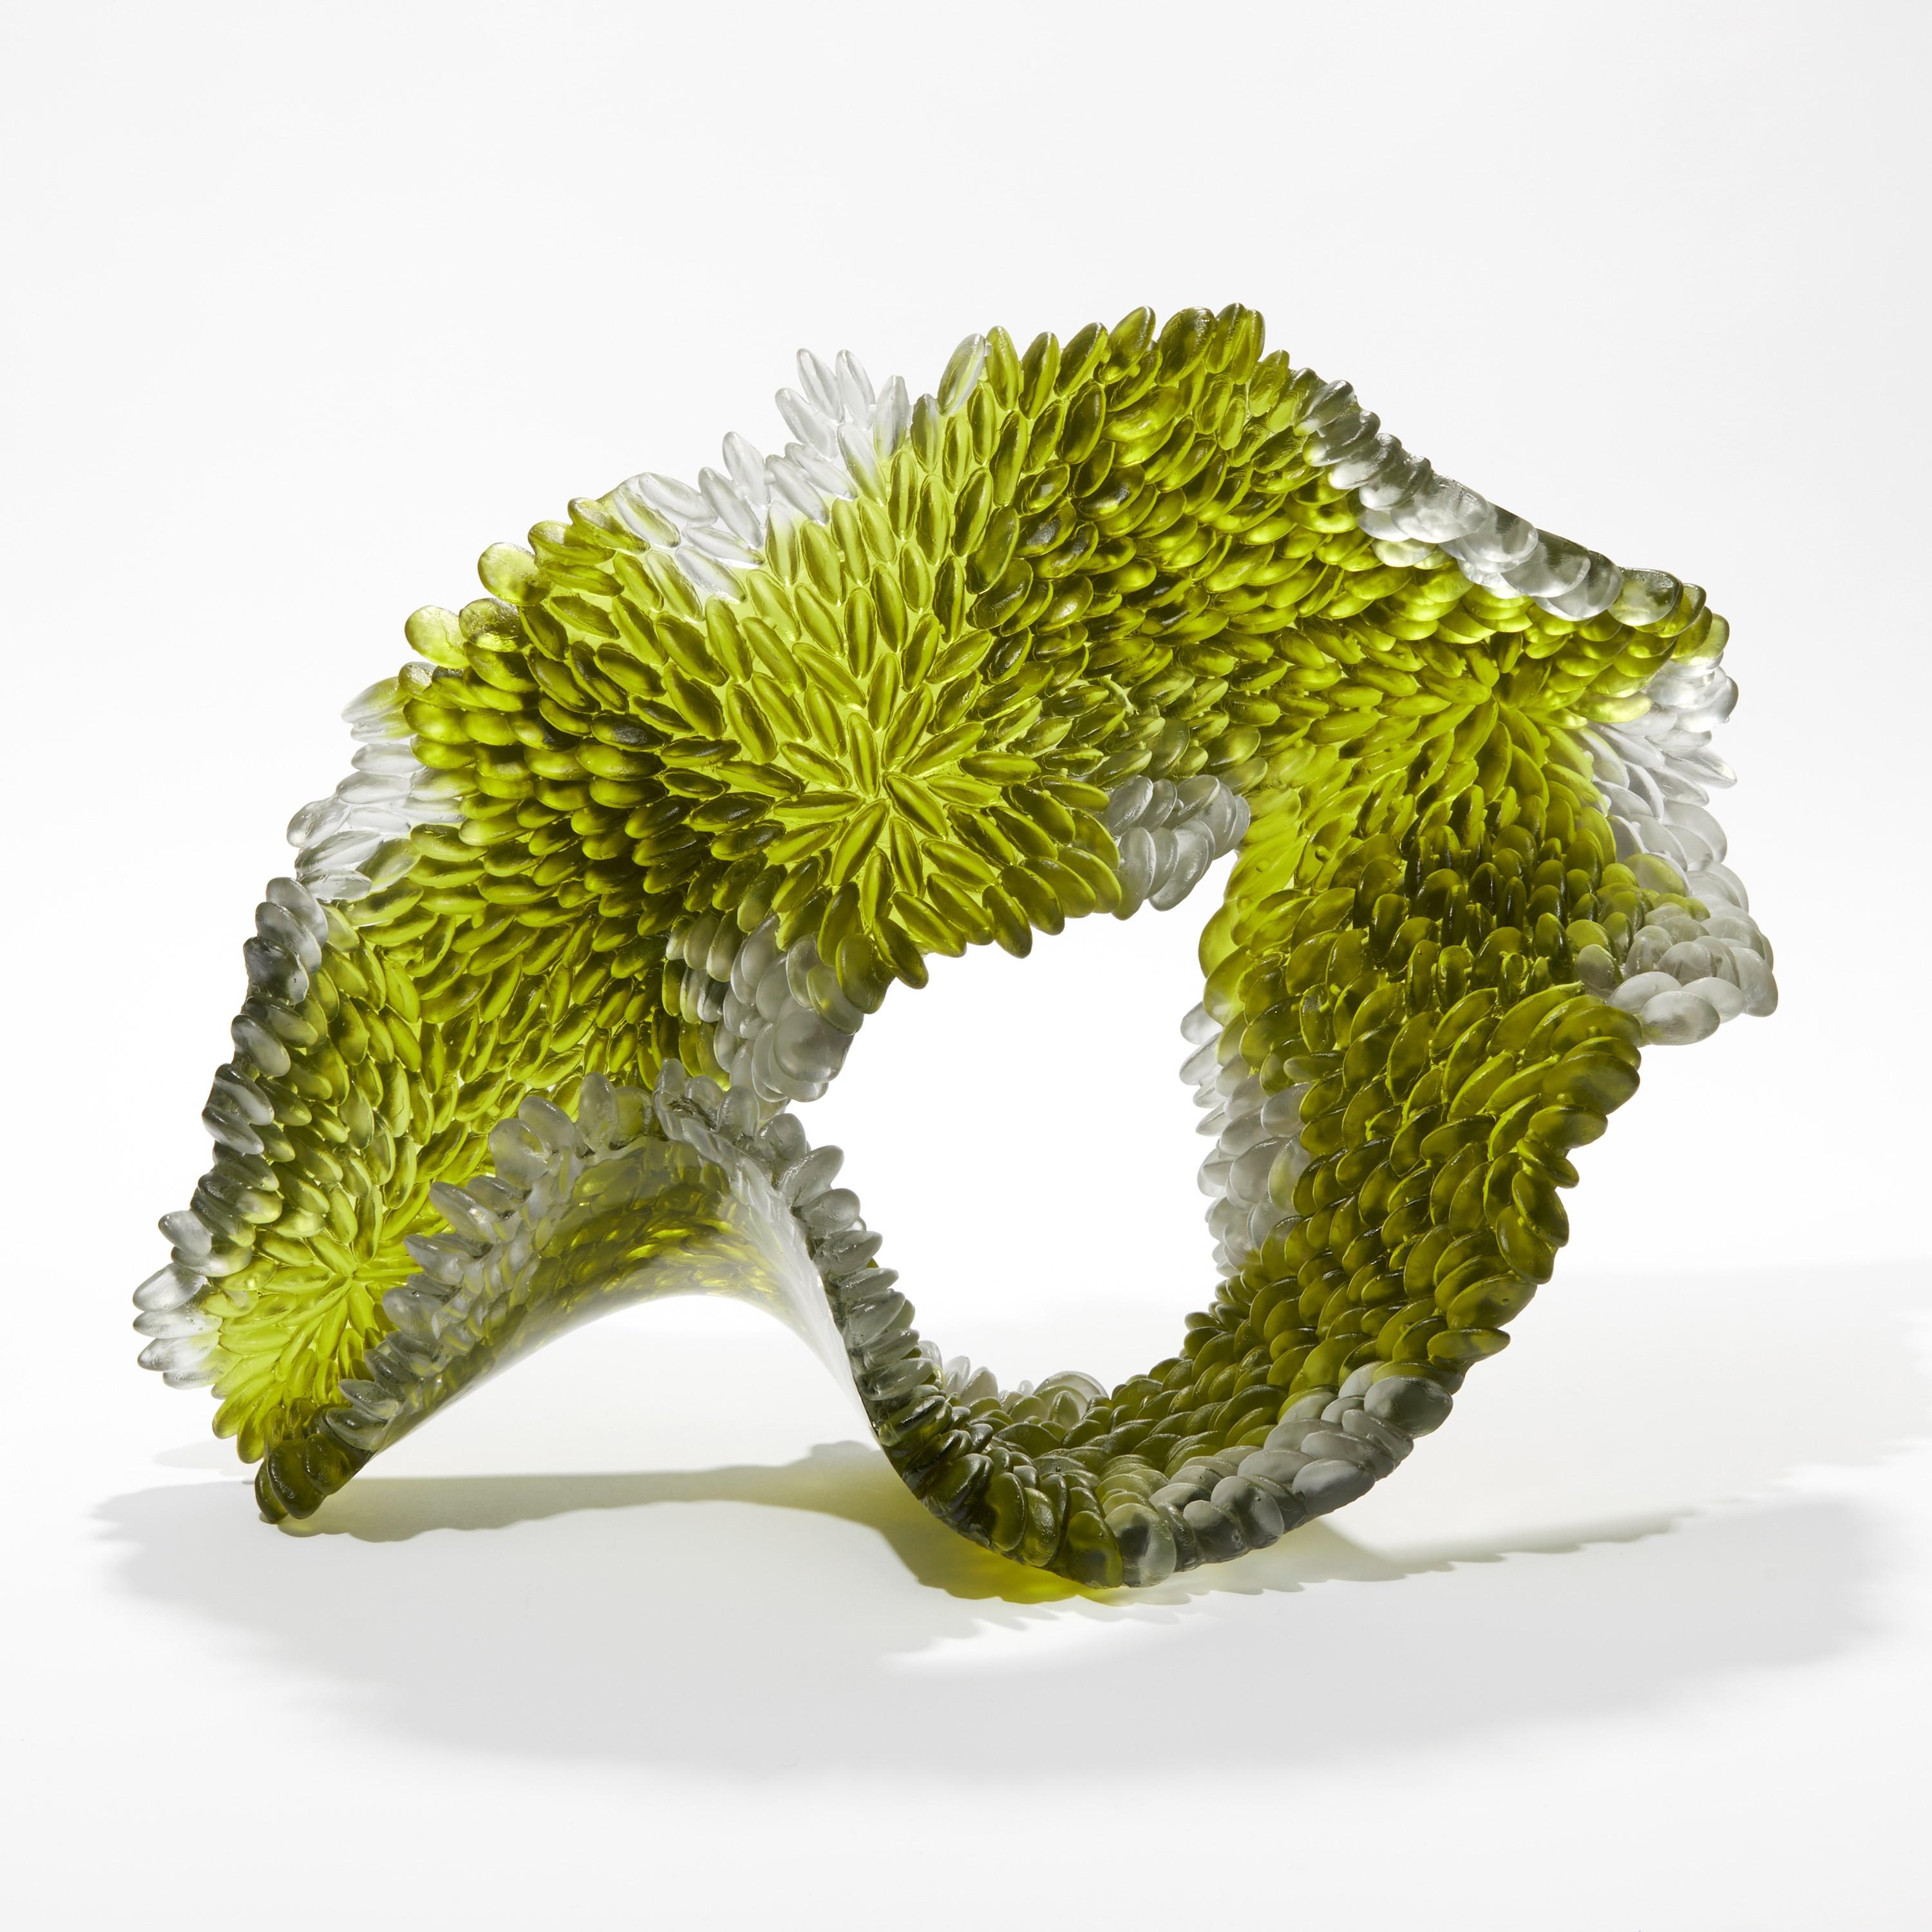 'Foliage I' is a unique glass sculpture by the British artist, Nina Casson McGarva.

Casson McGarva firstly casts her glass in a flat mould where she introduces all of the beautifully detailed, scaled surface texture, all unique and to her